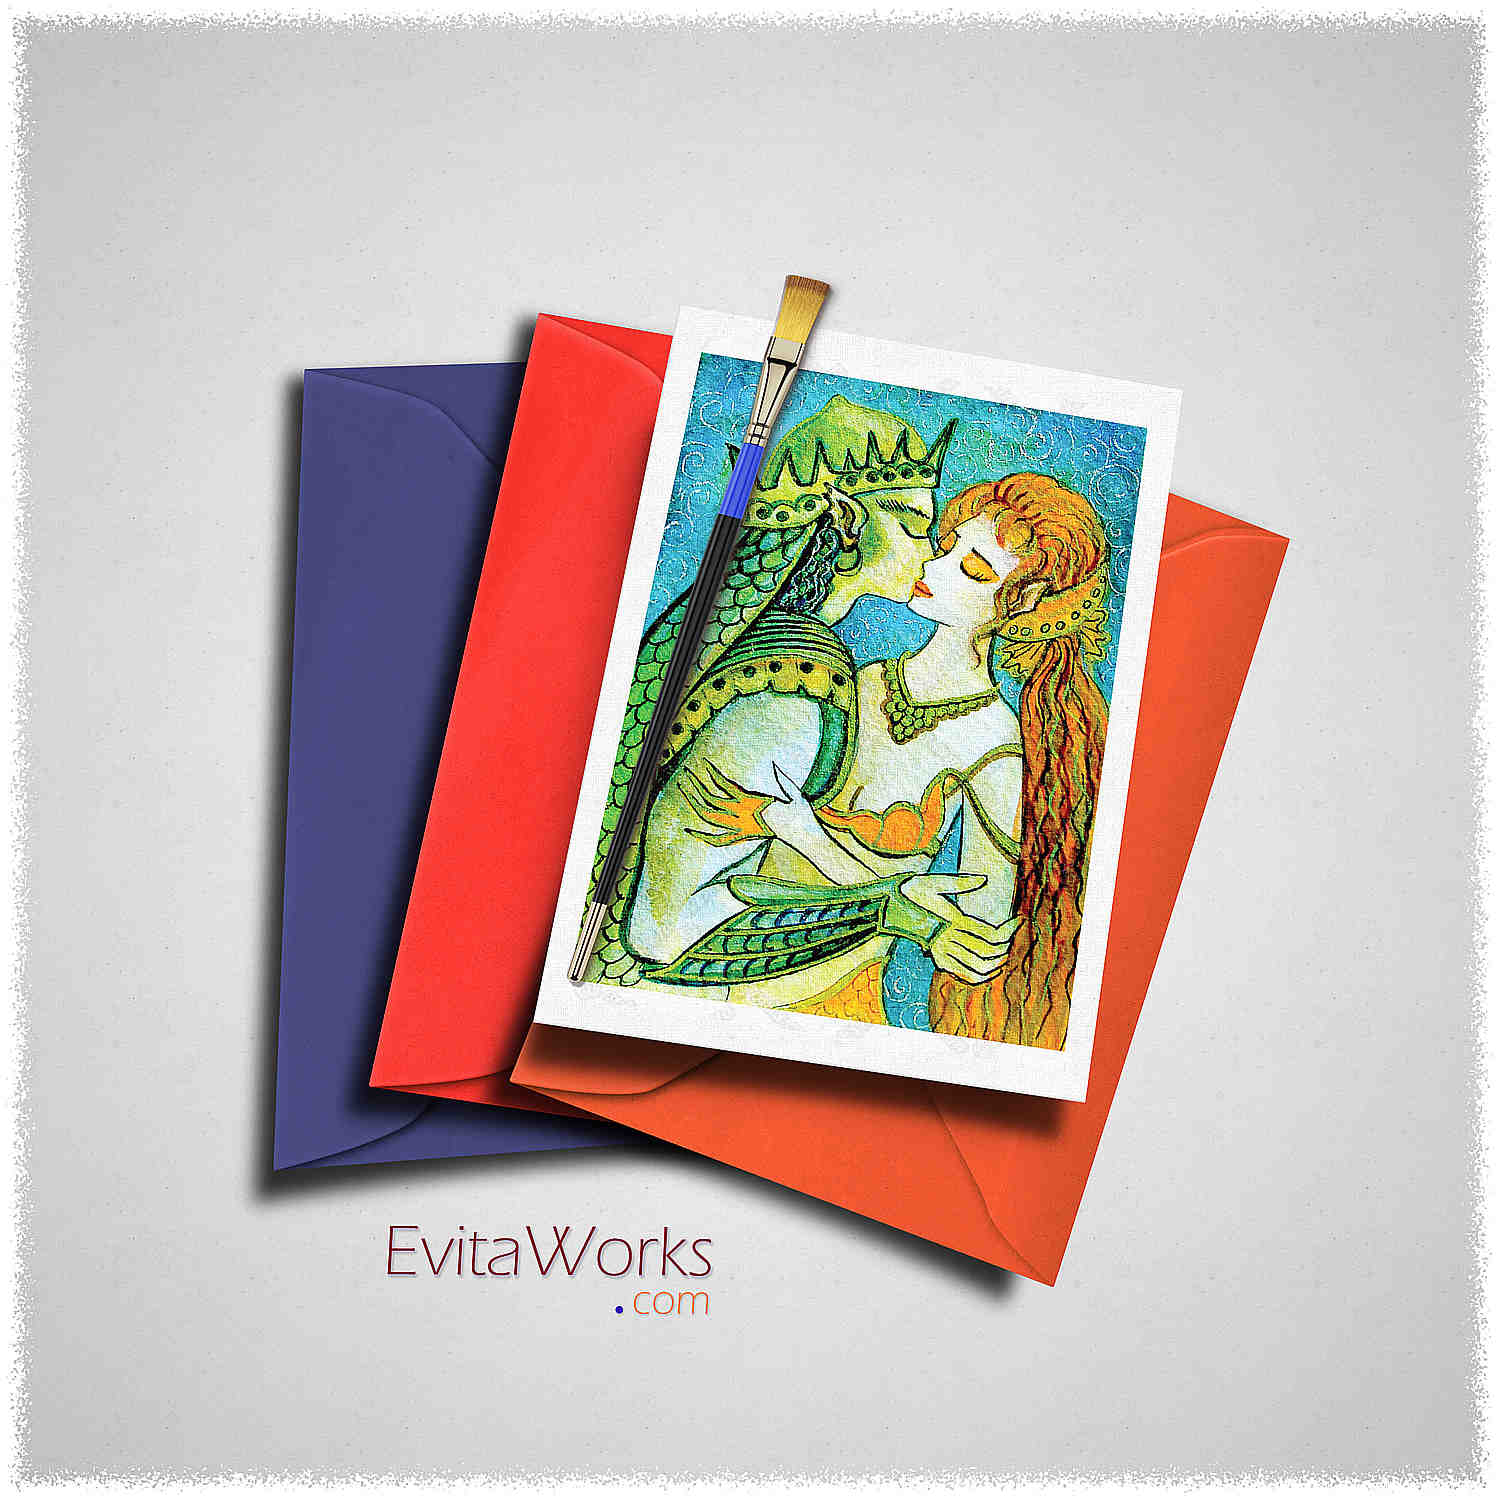 Hit to learn about "Mermaid 49, beautiful female creature, couple art" on cards